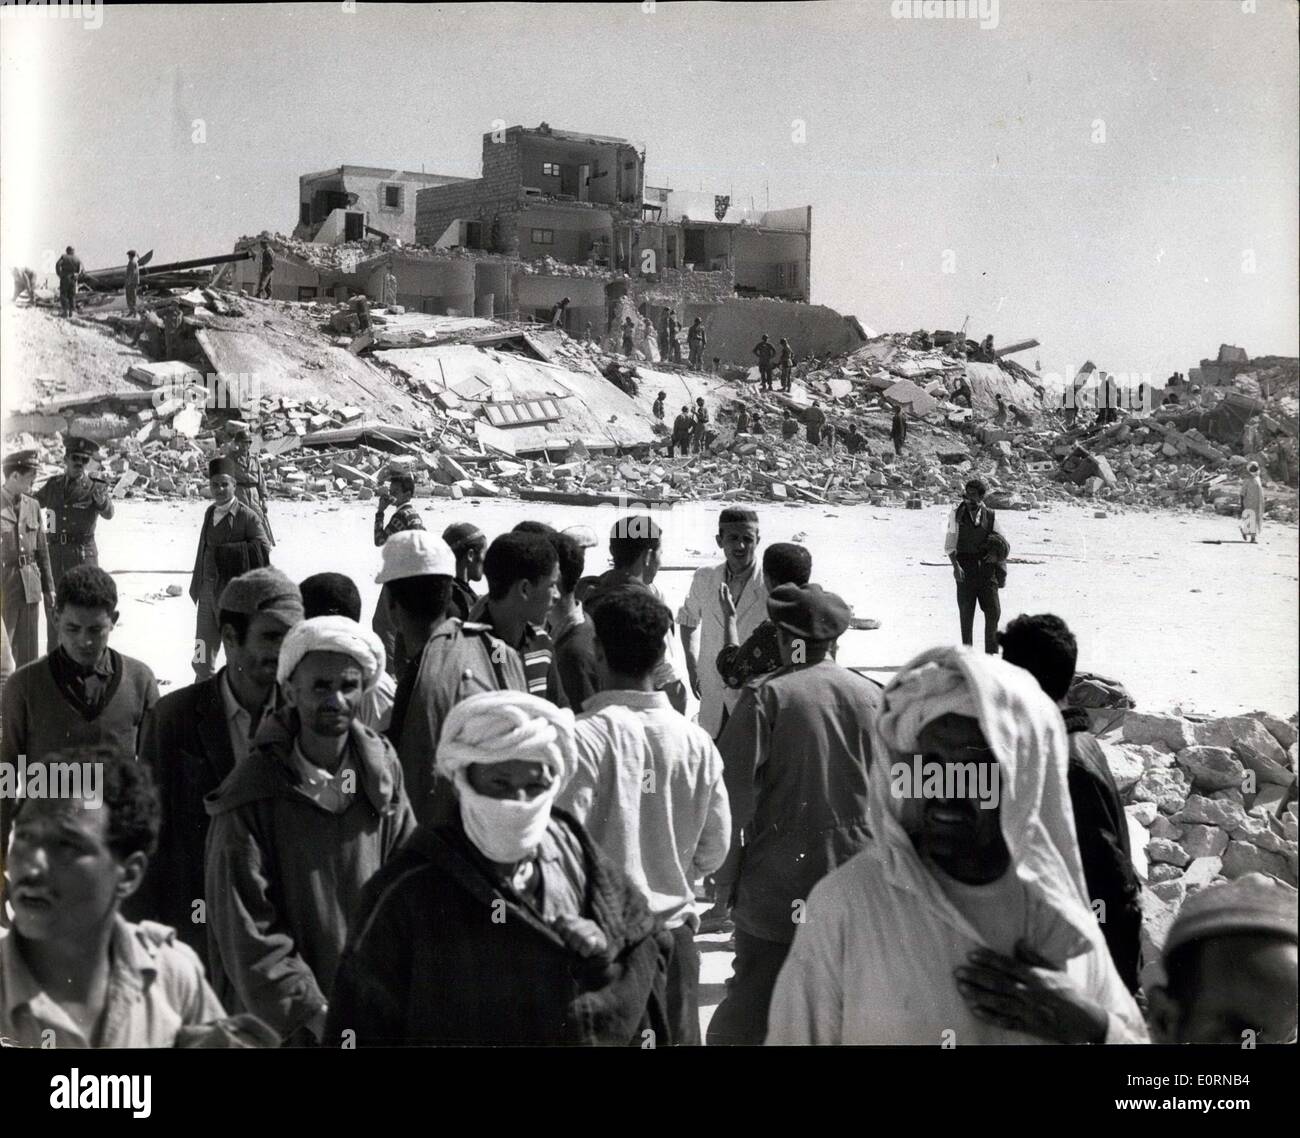 Mar. 04, 1960 - After the earthquake at Agadir. Ruined homes after the disaster.: Photo shows the shell of a building in background - as search for further victims goes on after the earthquake at Agadir, Morocco. Stock Photo